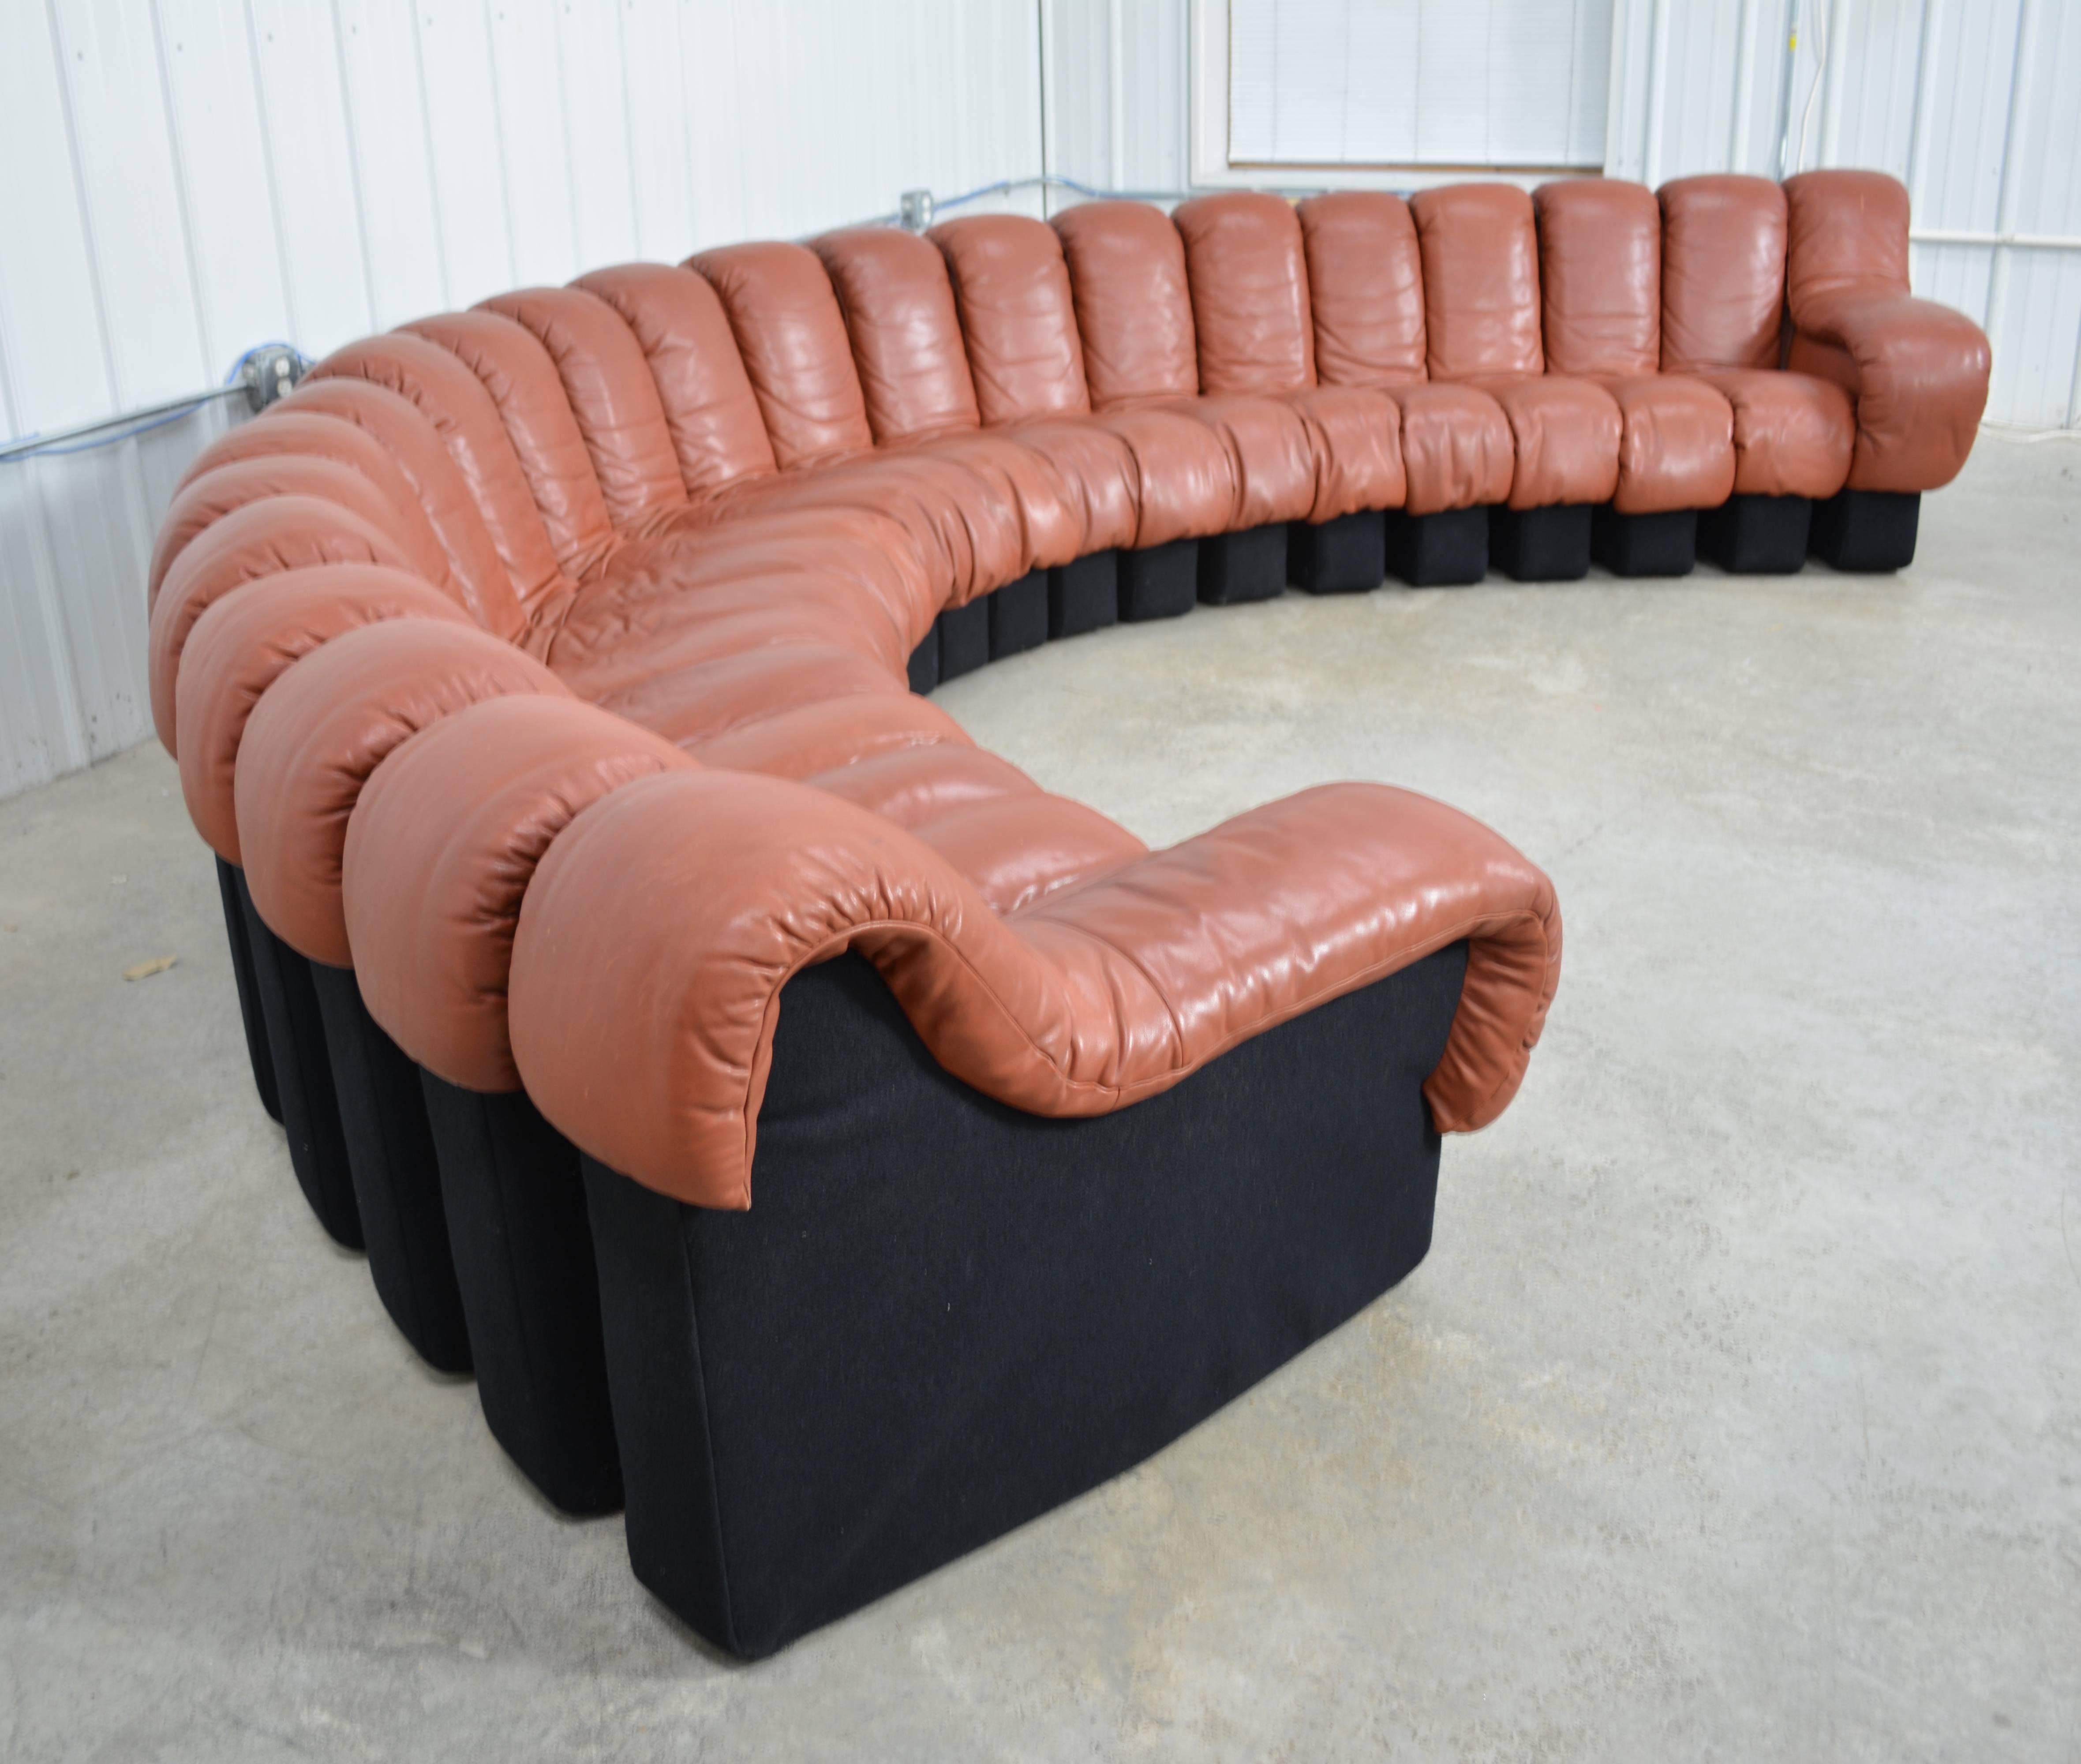 A De Sede DS600 non-stop modular sofa designed by Ueli Berger, Elenora Peduzzi-Riva and Heinz Ulrich and imported by Stendig. It consists of 22 sections that can be connected and arranged into to any shape. Original cognac leather upholstery and